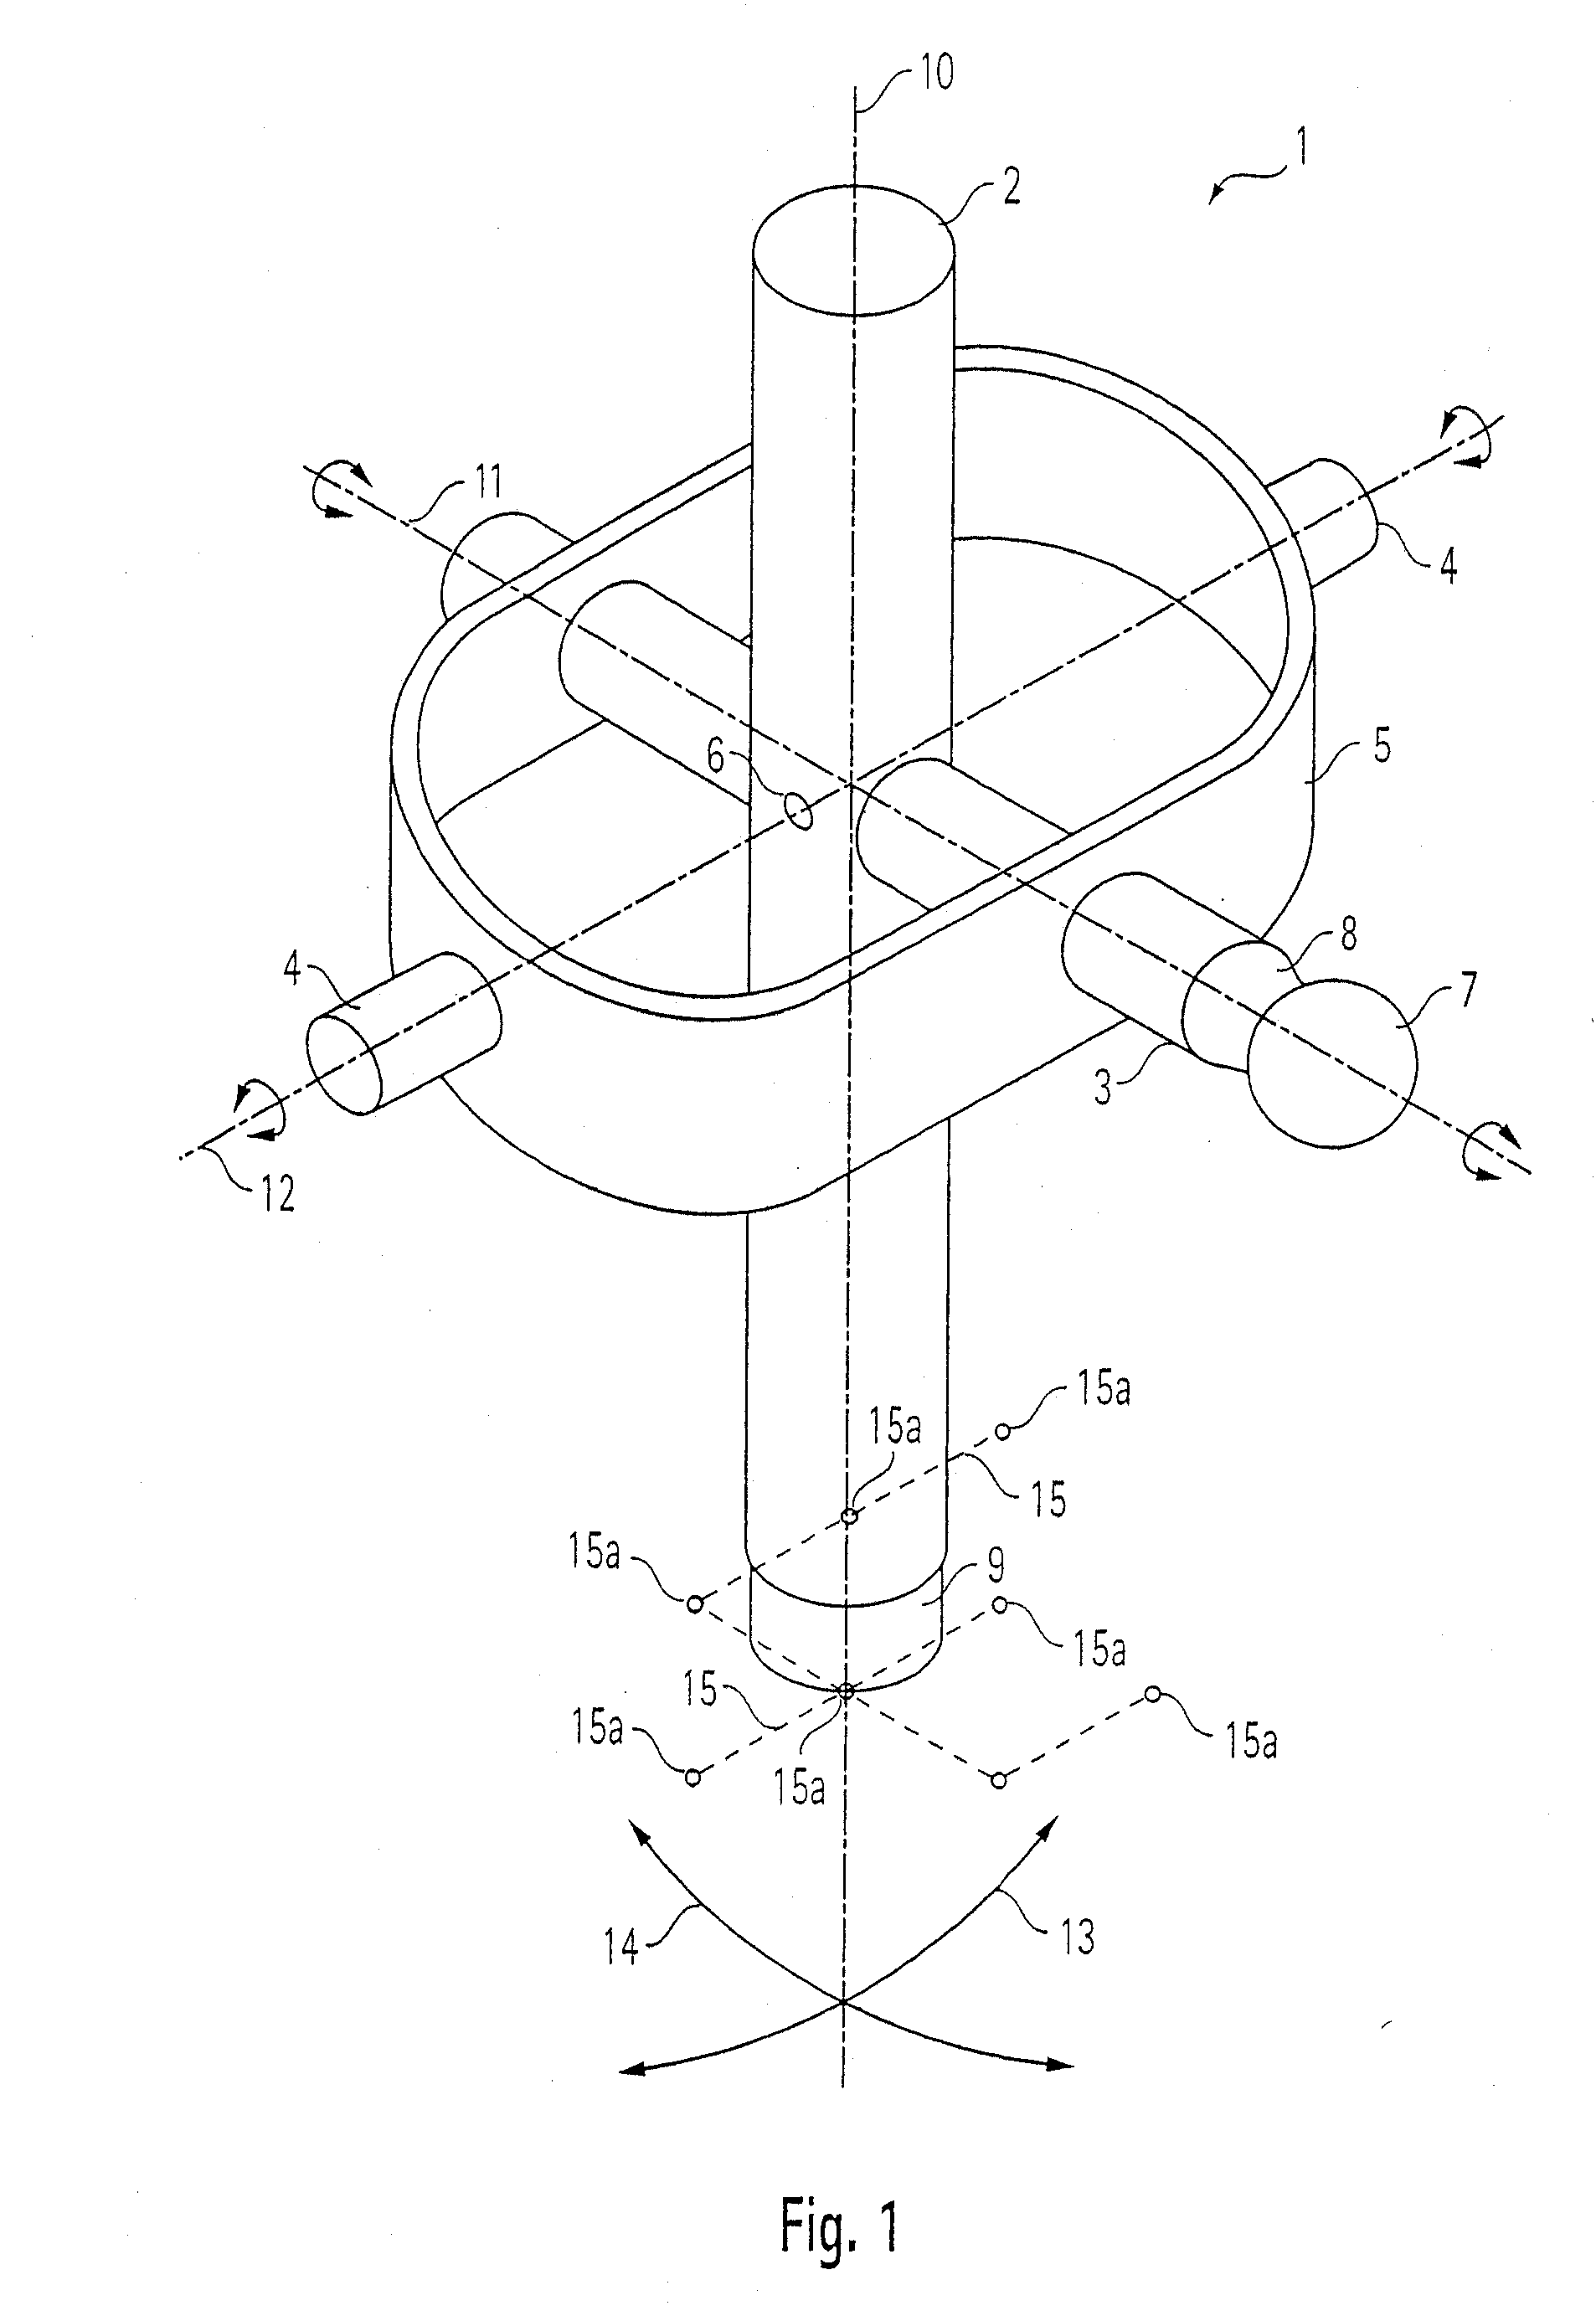 Movement converter for an isodistant shifting sensor system